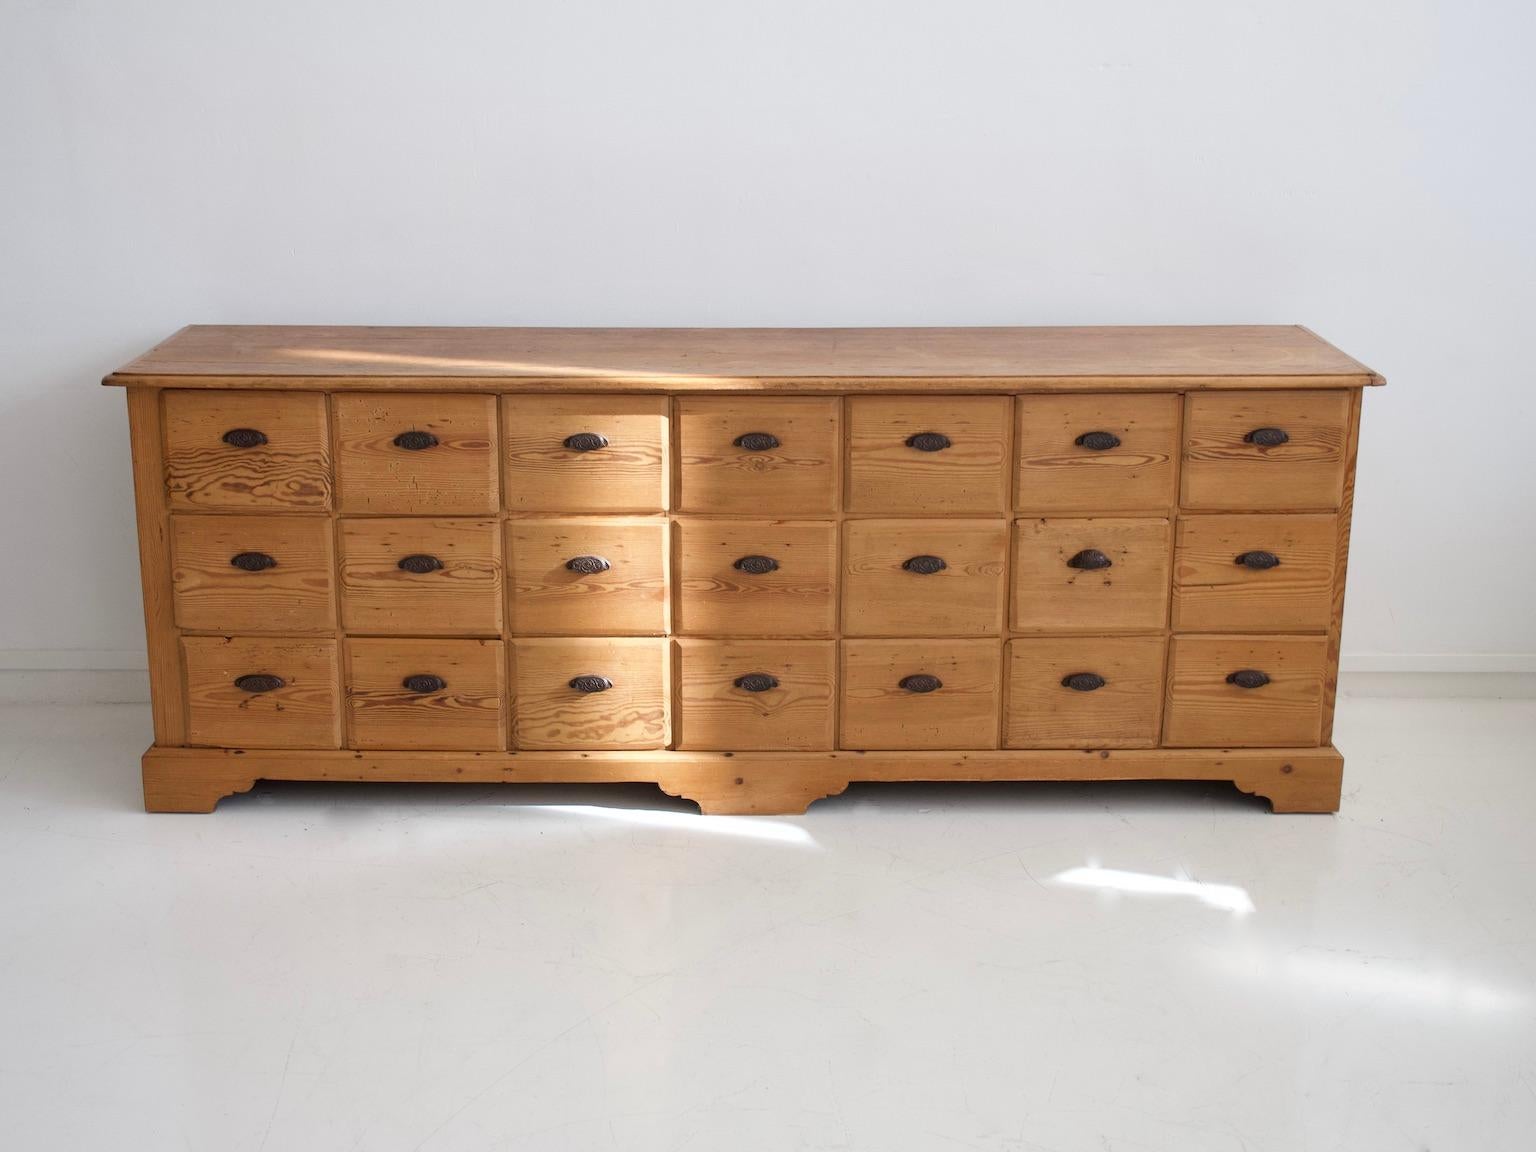 Large pine wood chest of drawers that could be used as a merchant desk. The chest features 21 drawers with metal handles. Made in the first half of the 20th century. Some age-related wear, marks and stains on top.